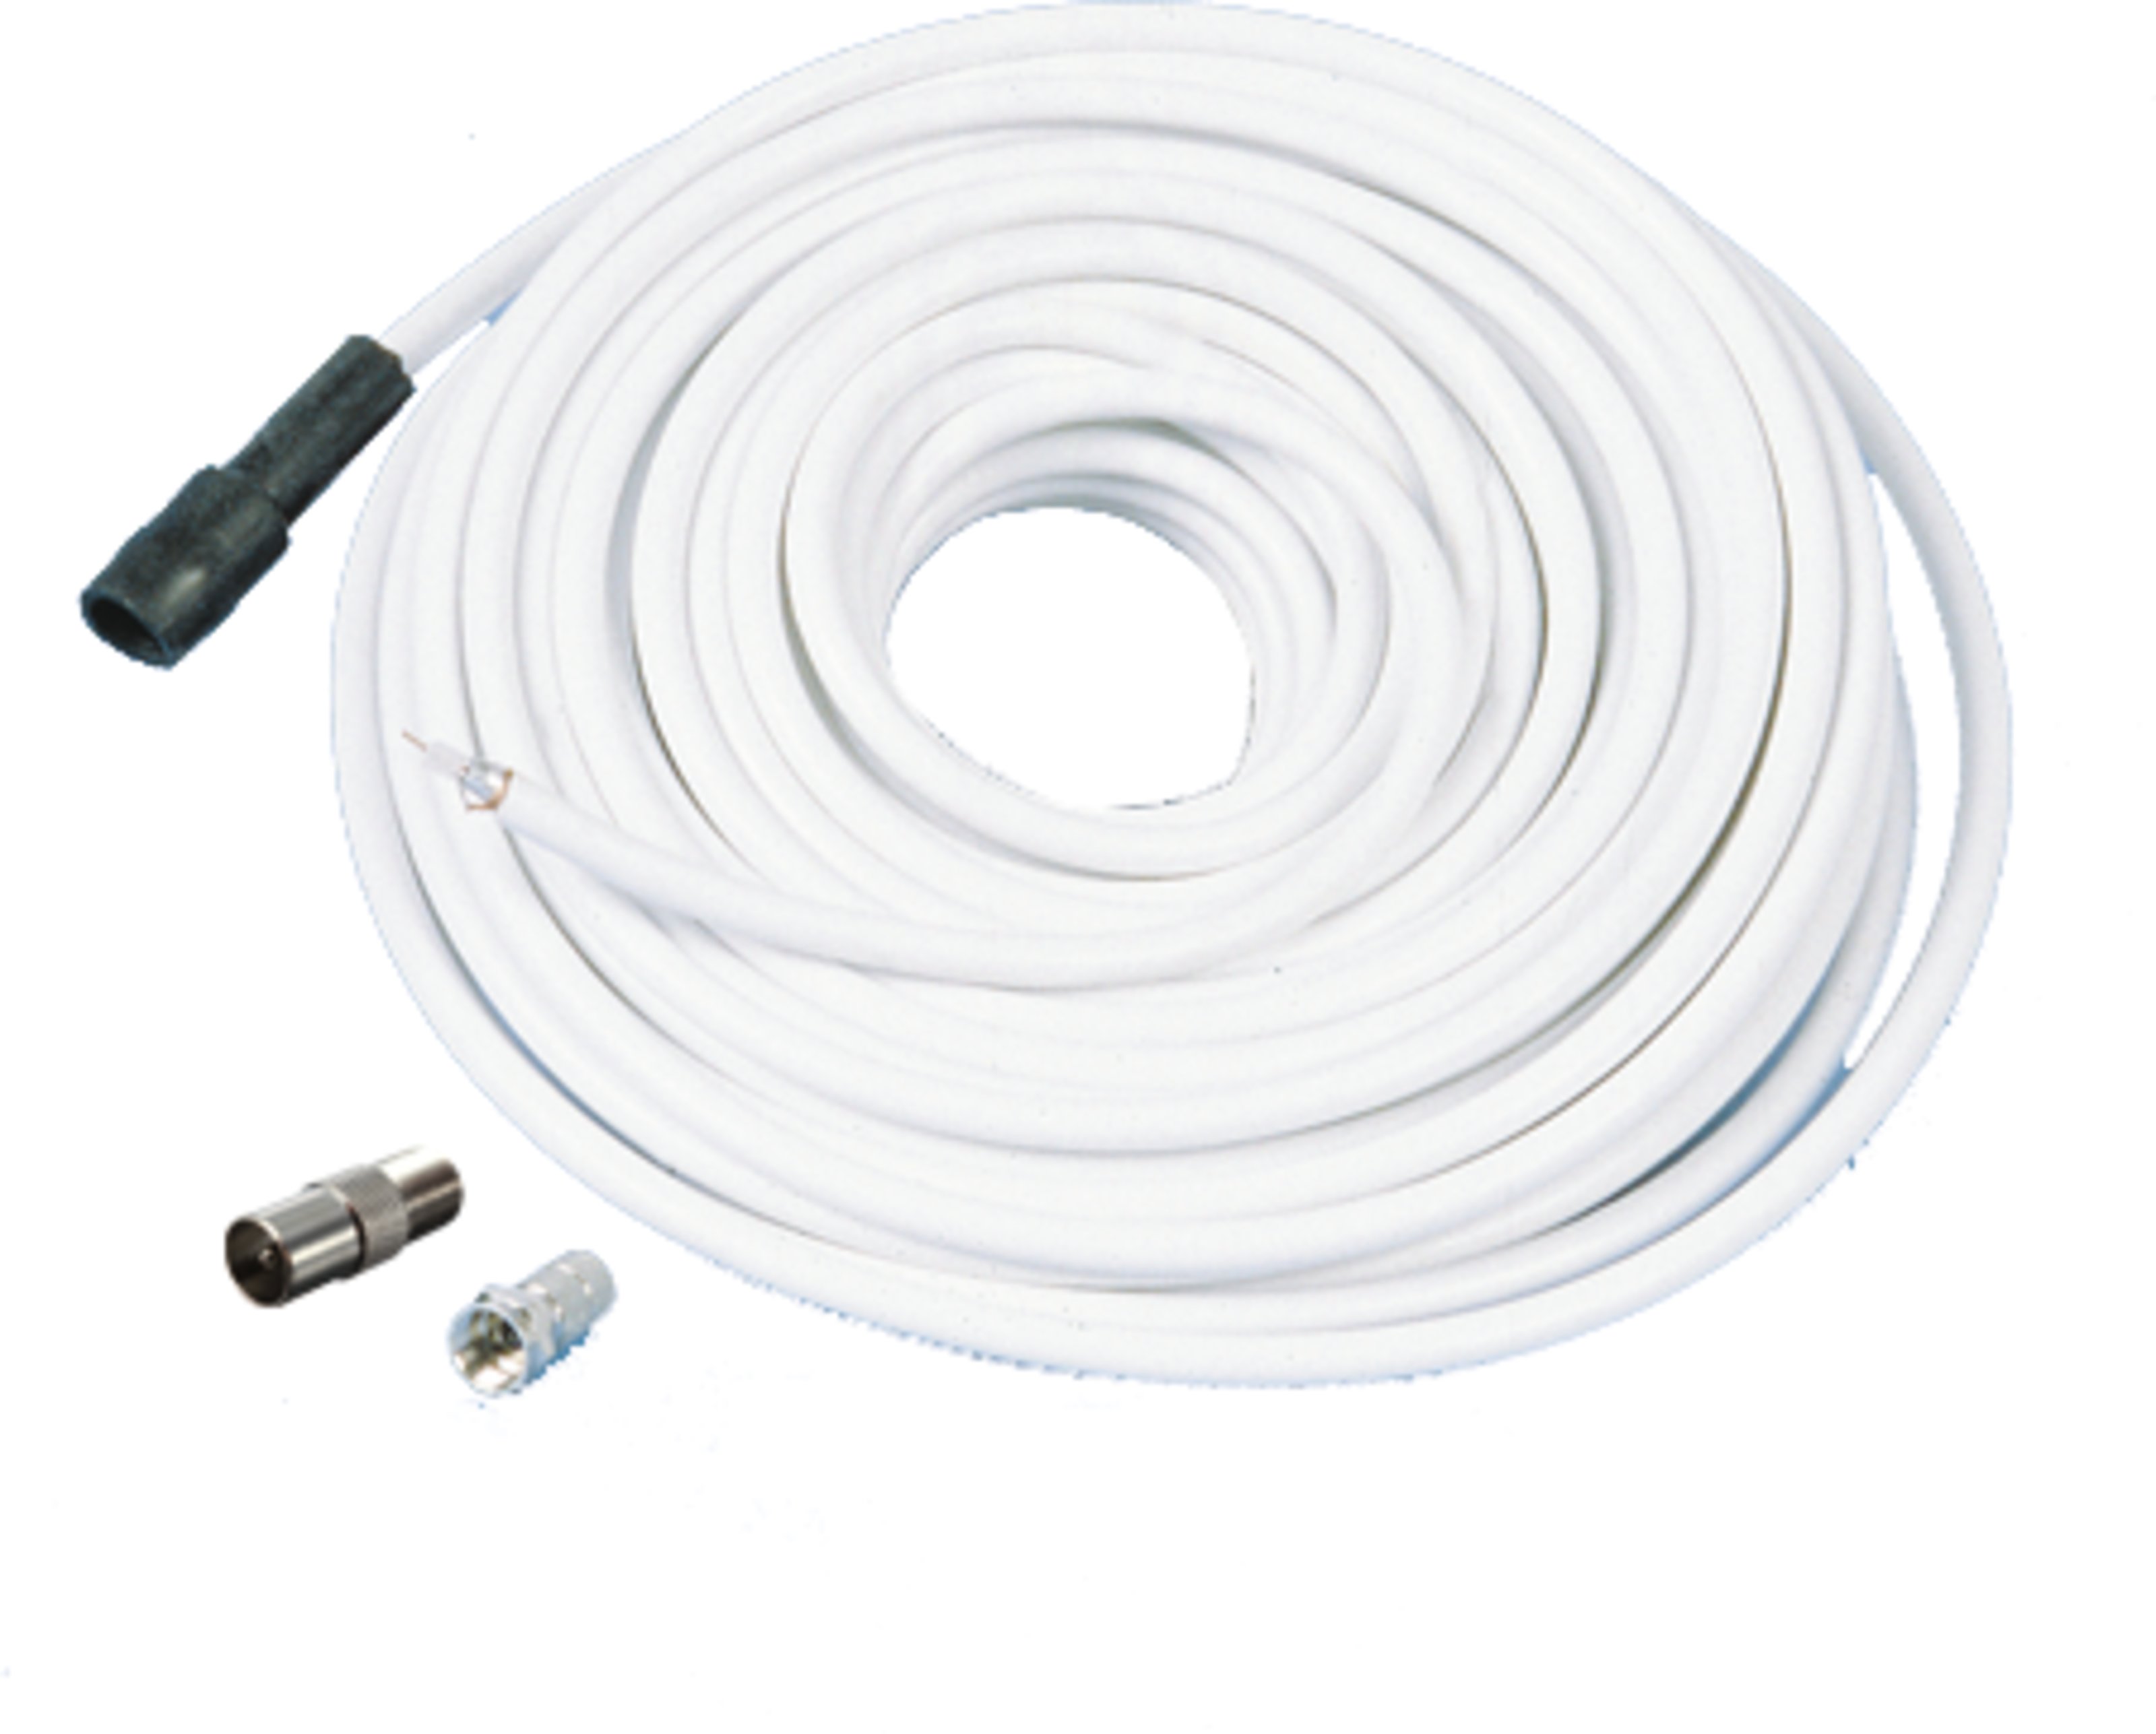 COAXCable CE uHD 20